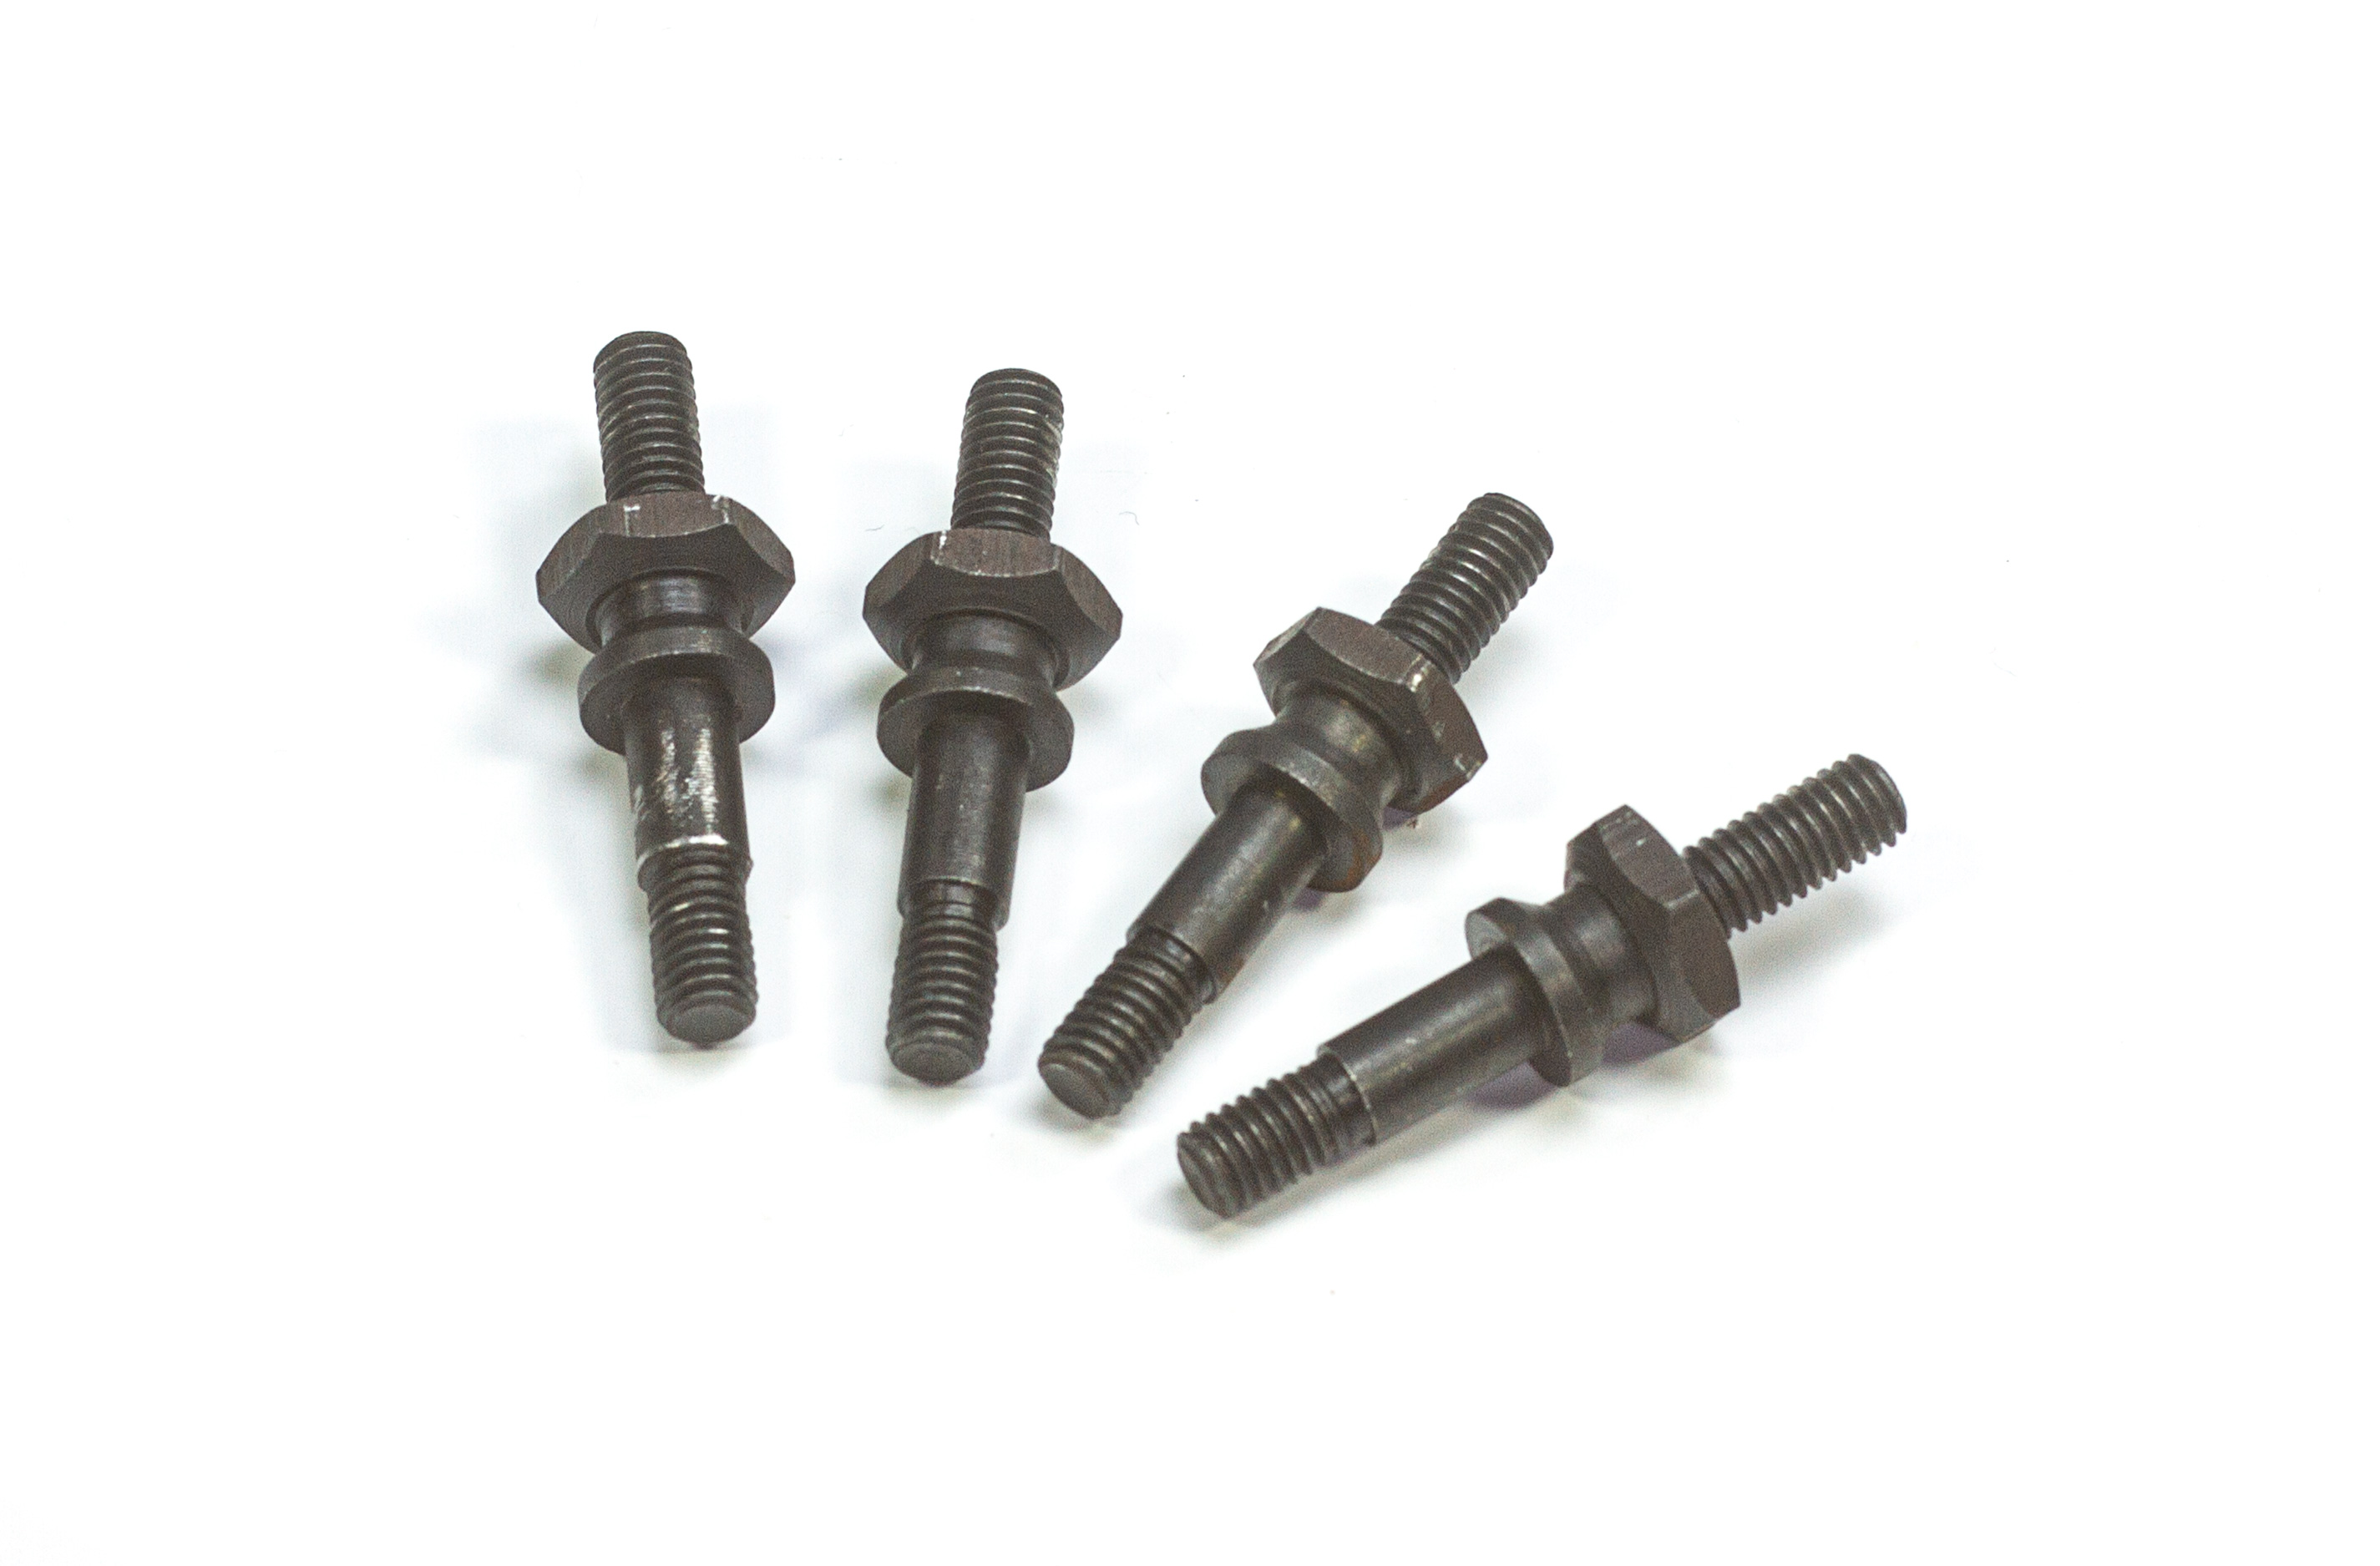 B56045 Screw for shock install M6x45mm